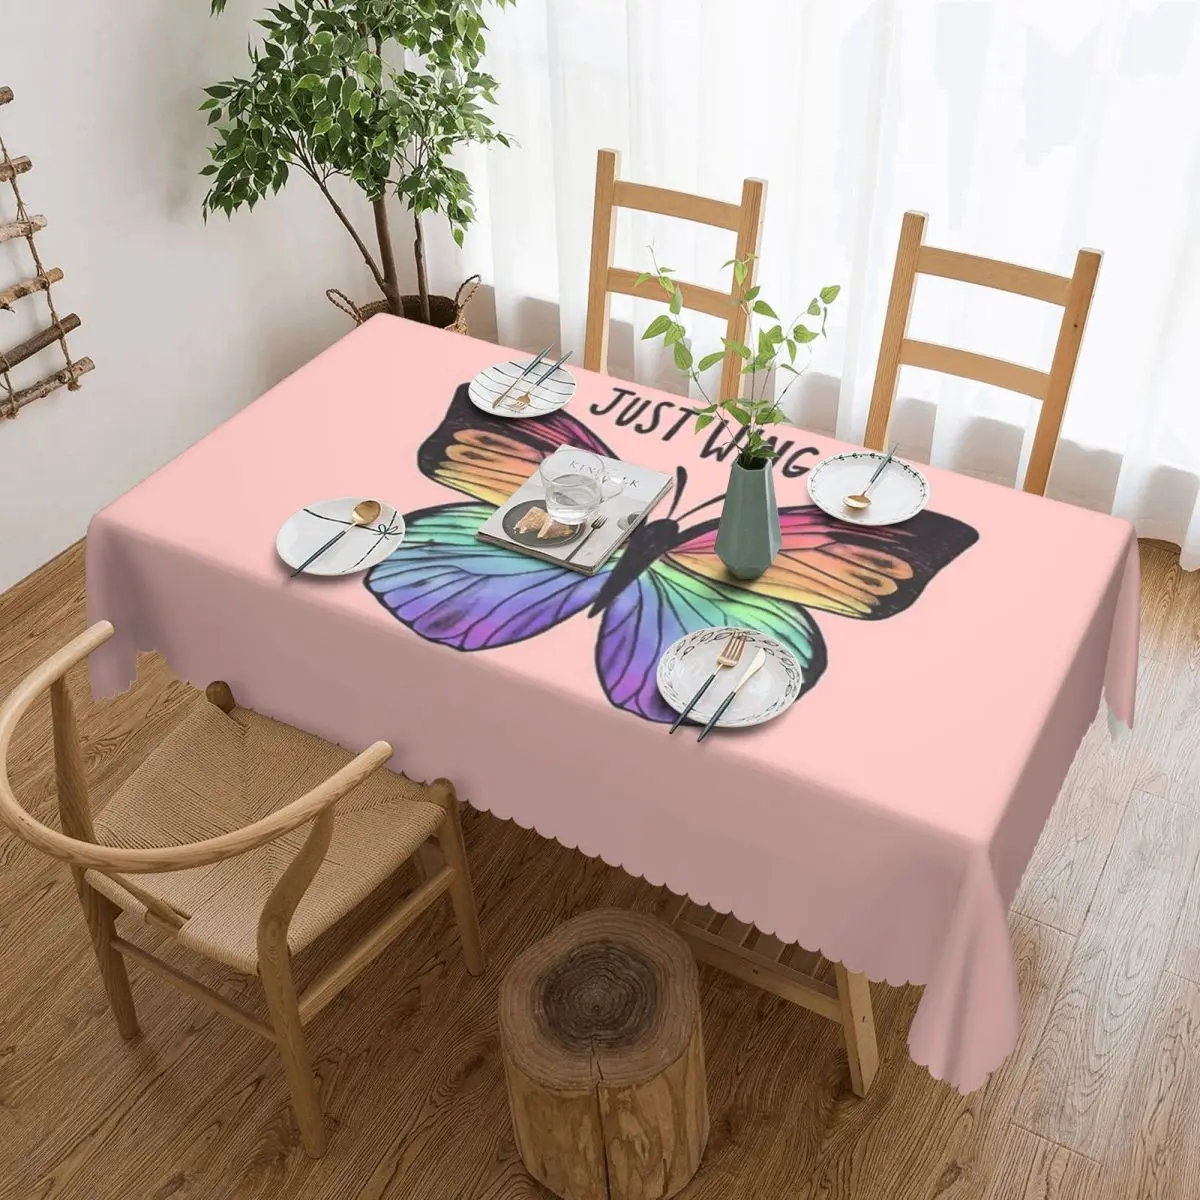 

Just Wing It Tablecloth 54x72in soft Decorative Border Great Gift